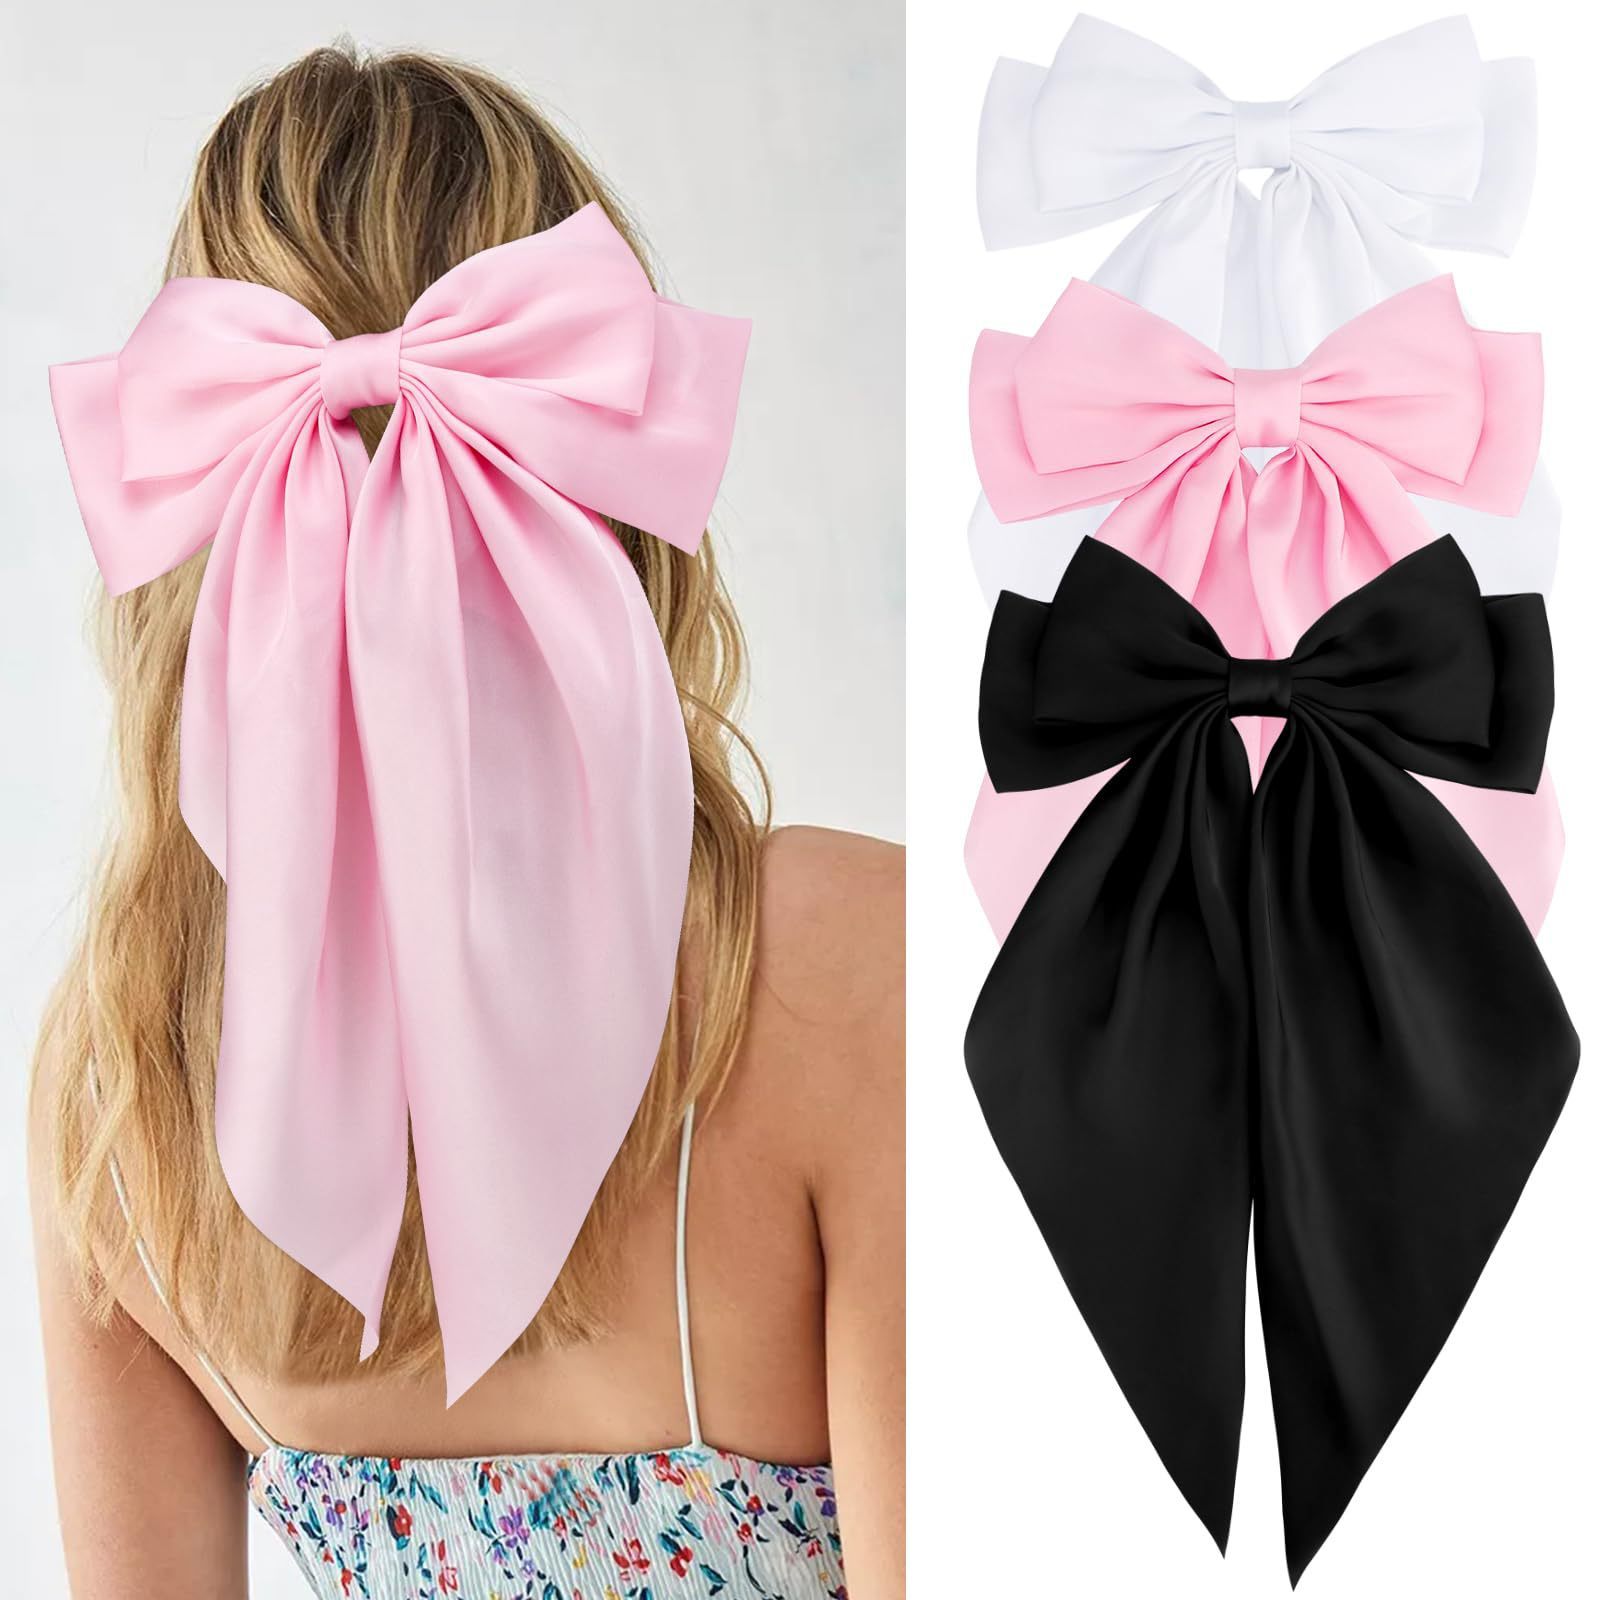 

3-piece Set Elegant Tassel Hair Clips - Vintage Sweet Silky Ribbon Bow Barrettes For Women & Girls, Perfect For Casual Parties & Princess Fairy Style Accessories